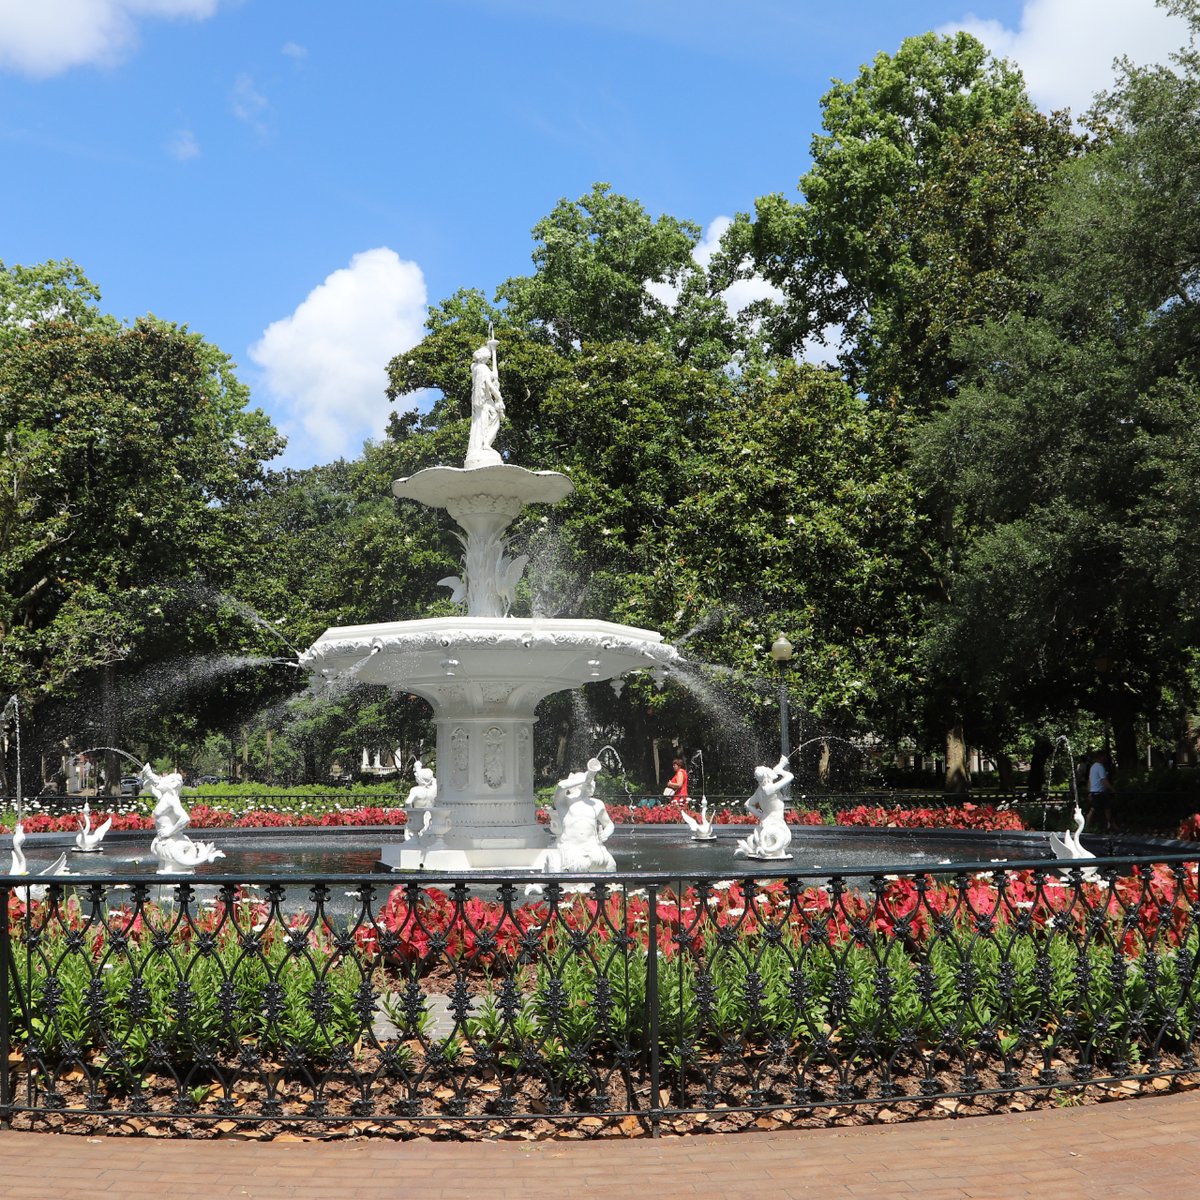 Congratulations Visit Savannah for being voted by Global Traveler's readers as Best Weekend Destination in North America for the fifth consecutive year.